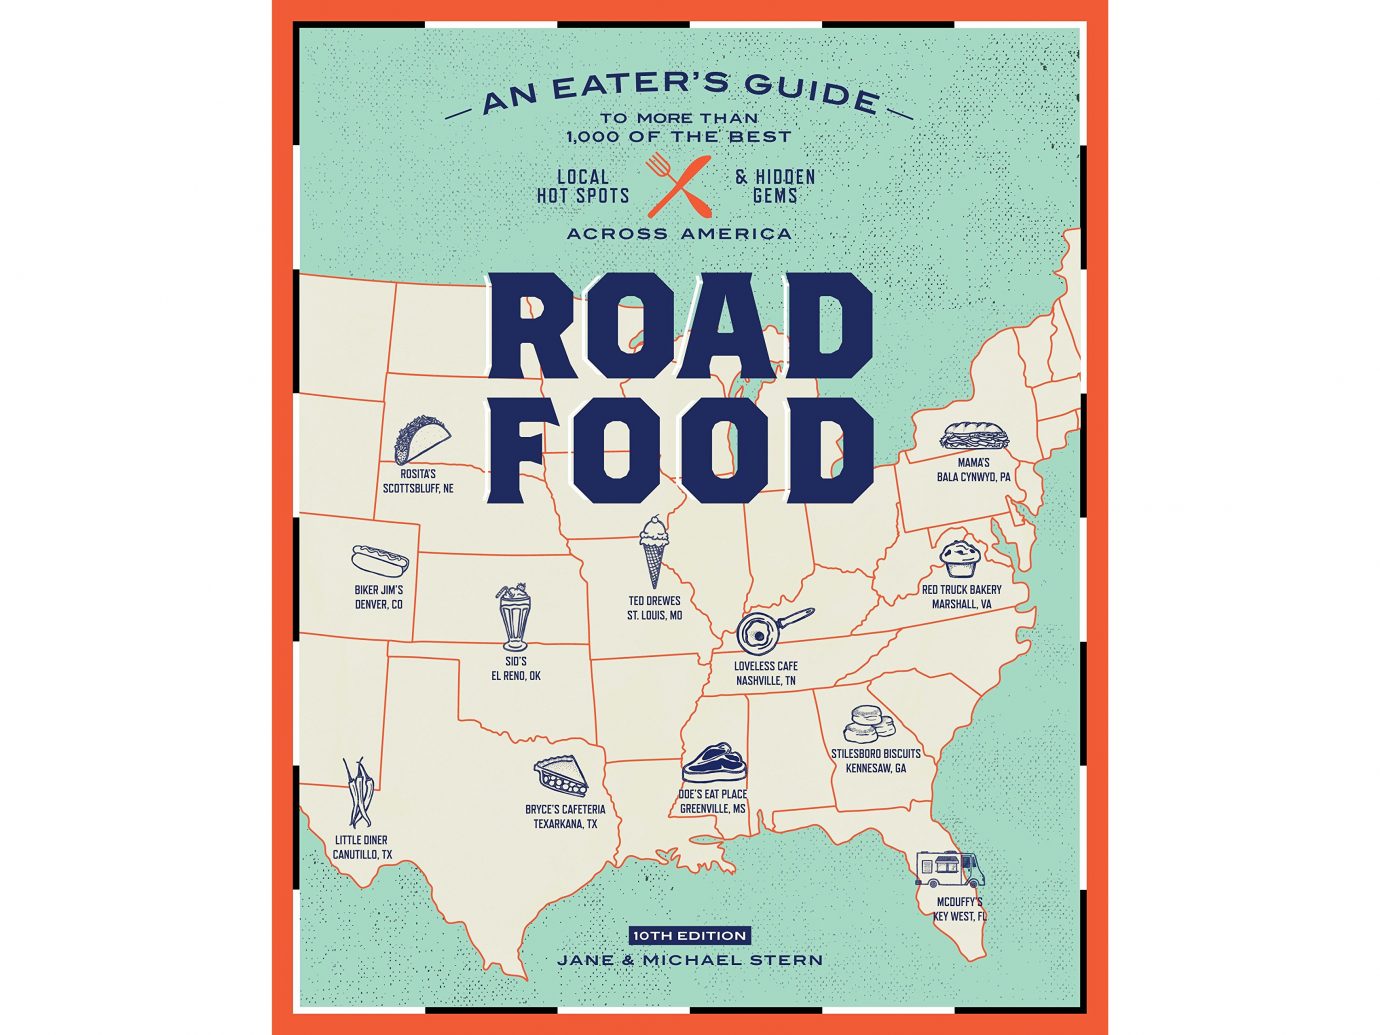 Roadfood, 10th Edition: An Eater's Guide to More Than 1,000 of the Best Local Hot Spots and Hidden Gems Across America